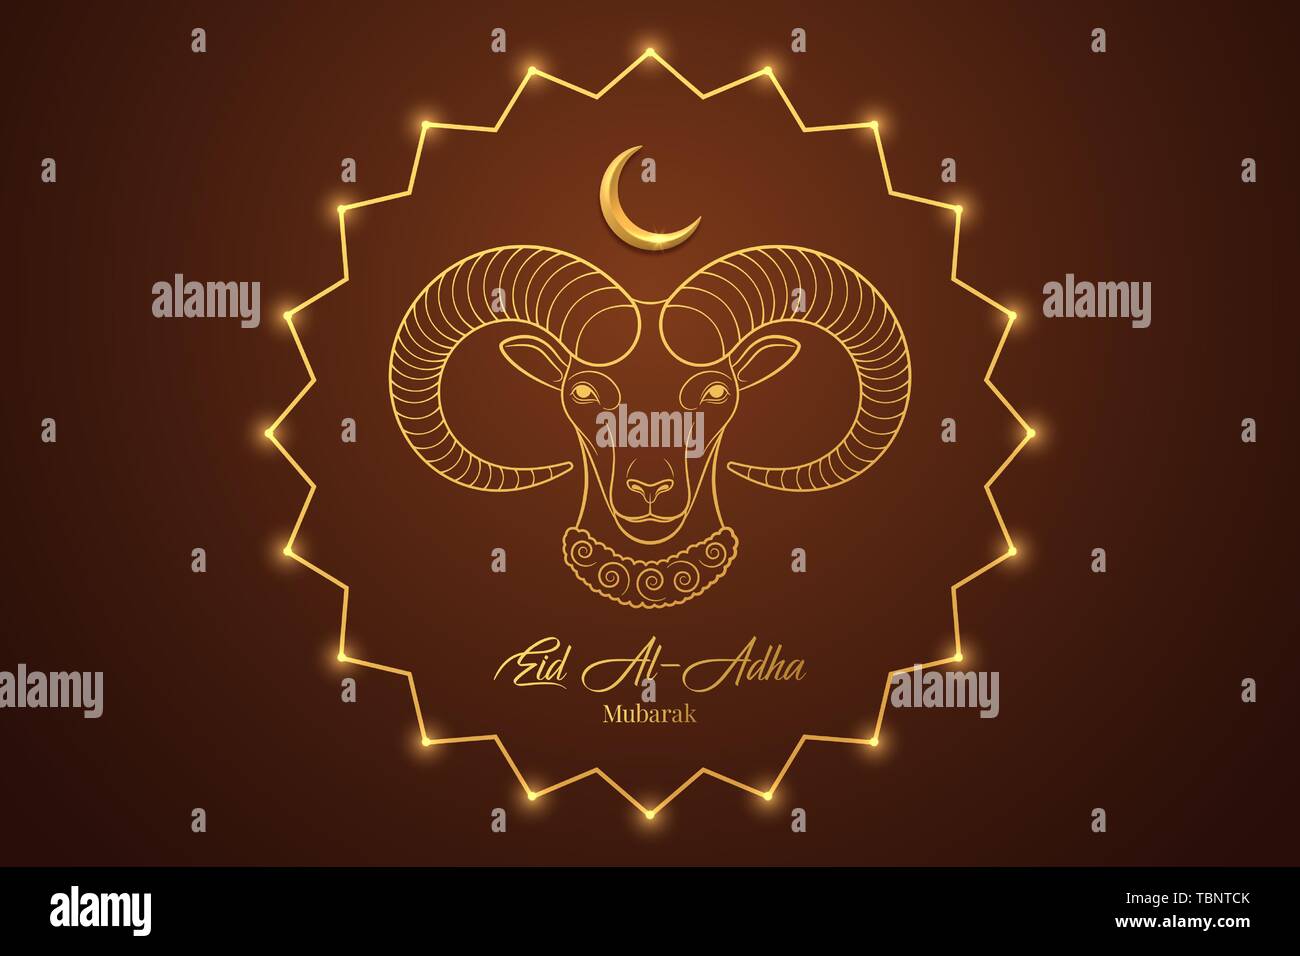 Eid Al Adha Mubarak Muslim Holiday The Feast Of Sacrifice With Golden Ram And Crescent On The Brown Background Vector Illustration Graphic Design Stock Vector Image Art Alamy